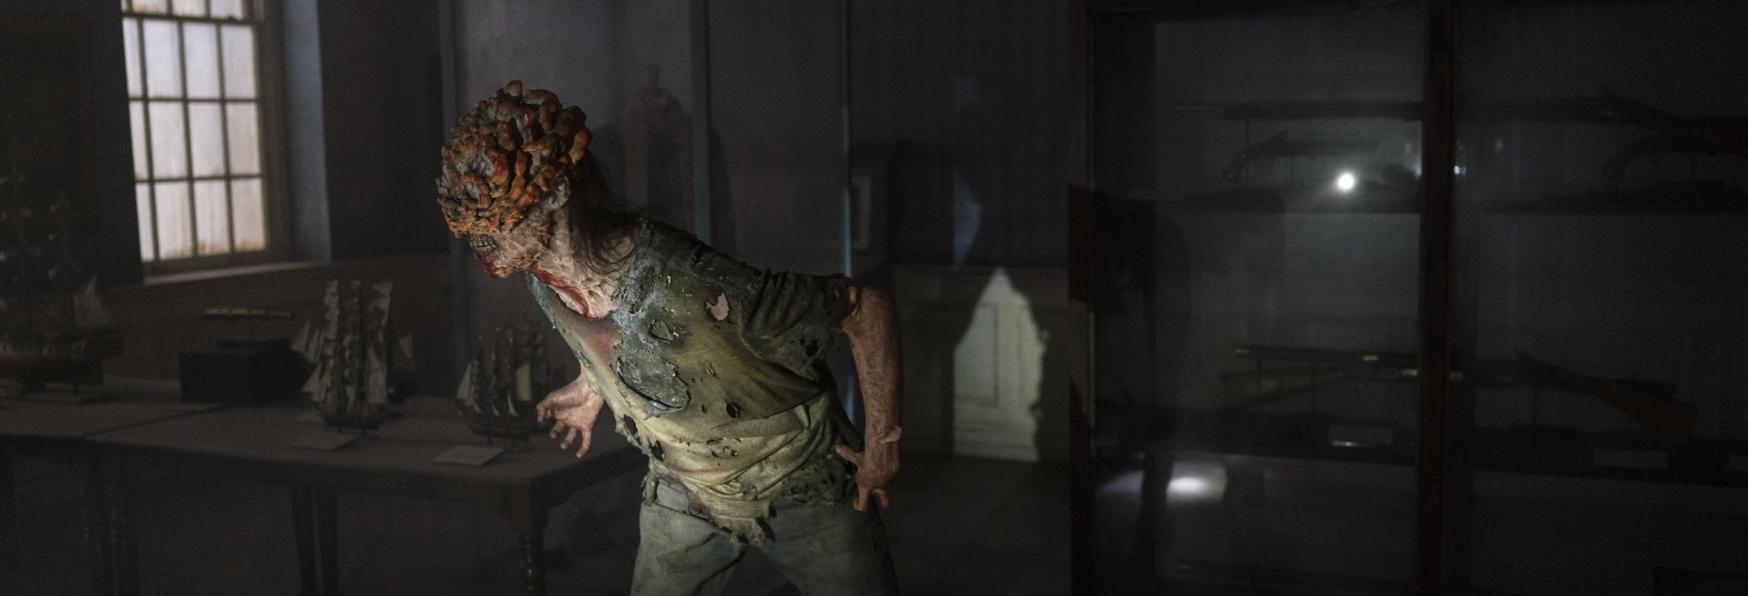  The Last of Us 1x04: il Trailer del Prossimo Episodio, "Please Hold on to My Hand"